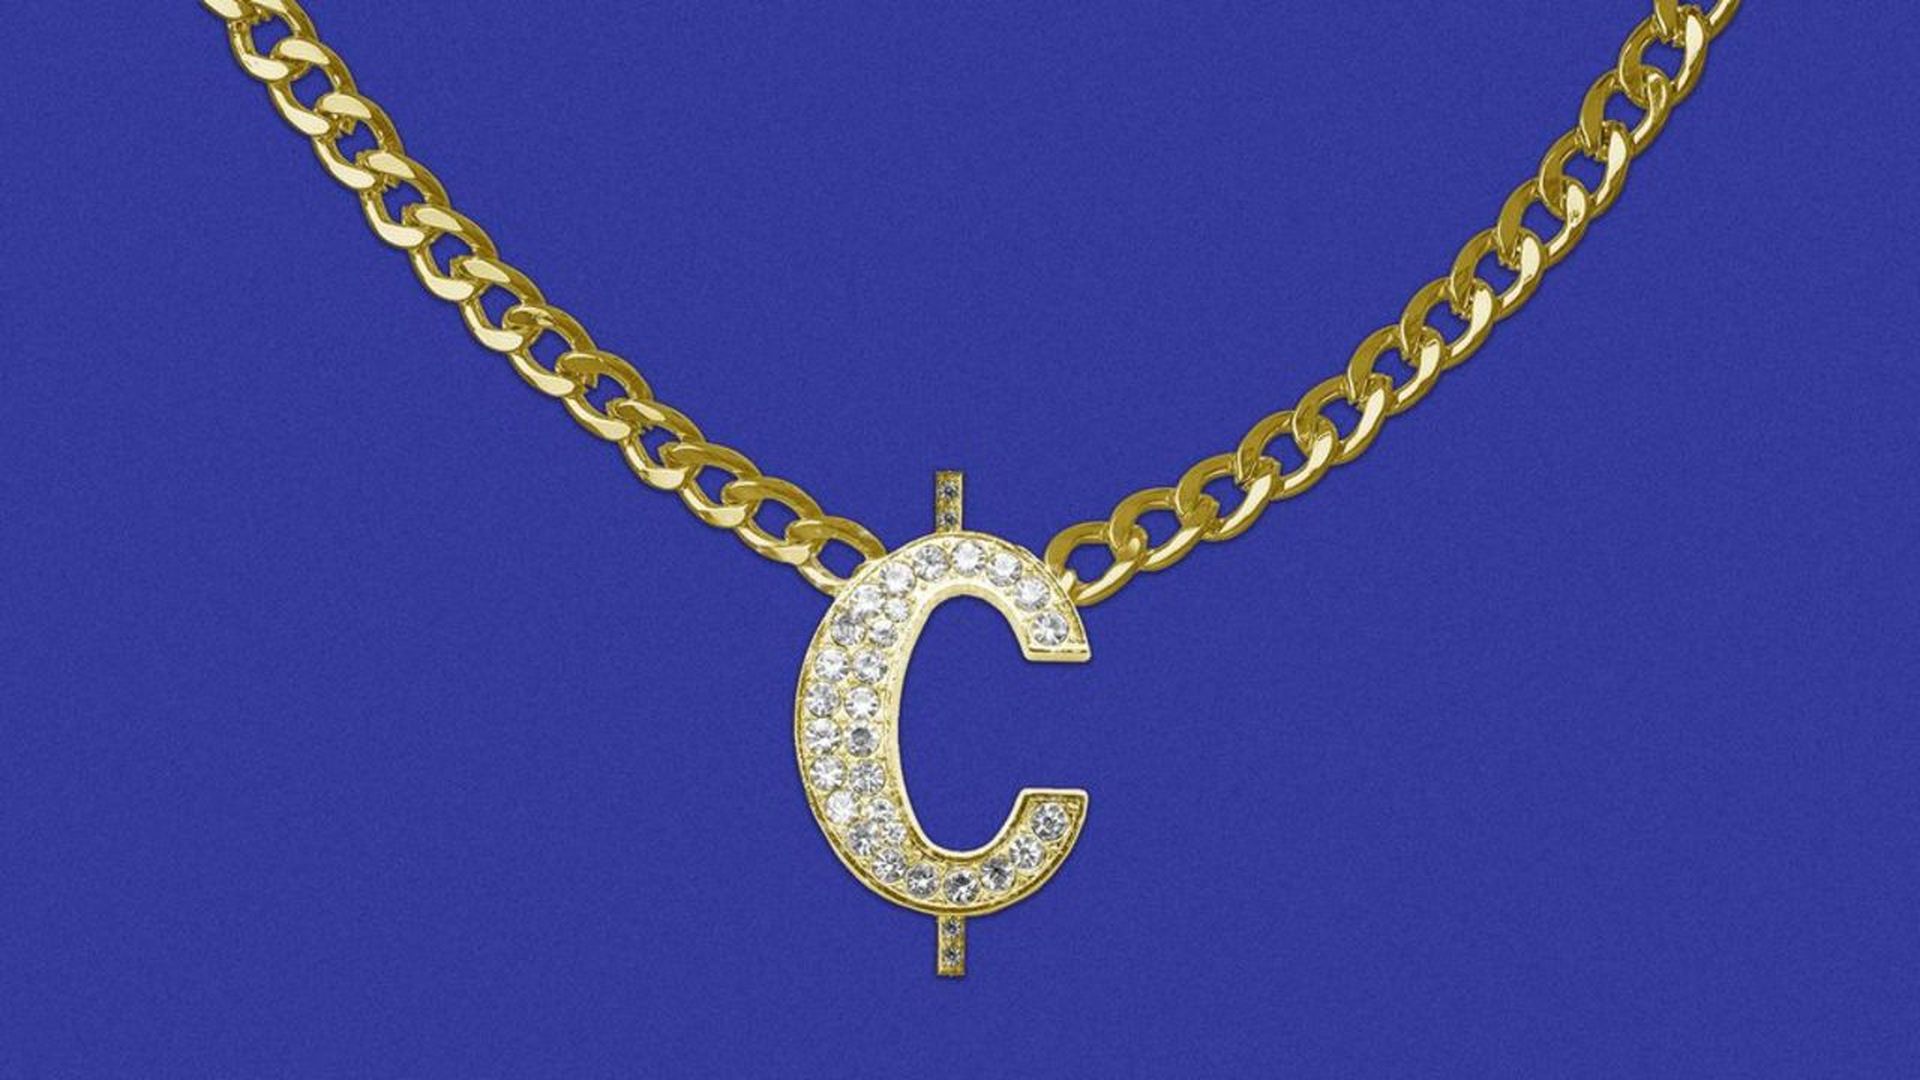 illustration of a necklace with a blinged out cent symbol